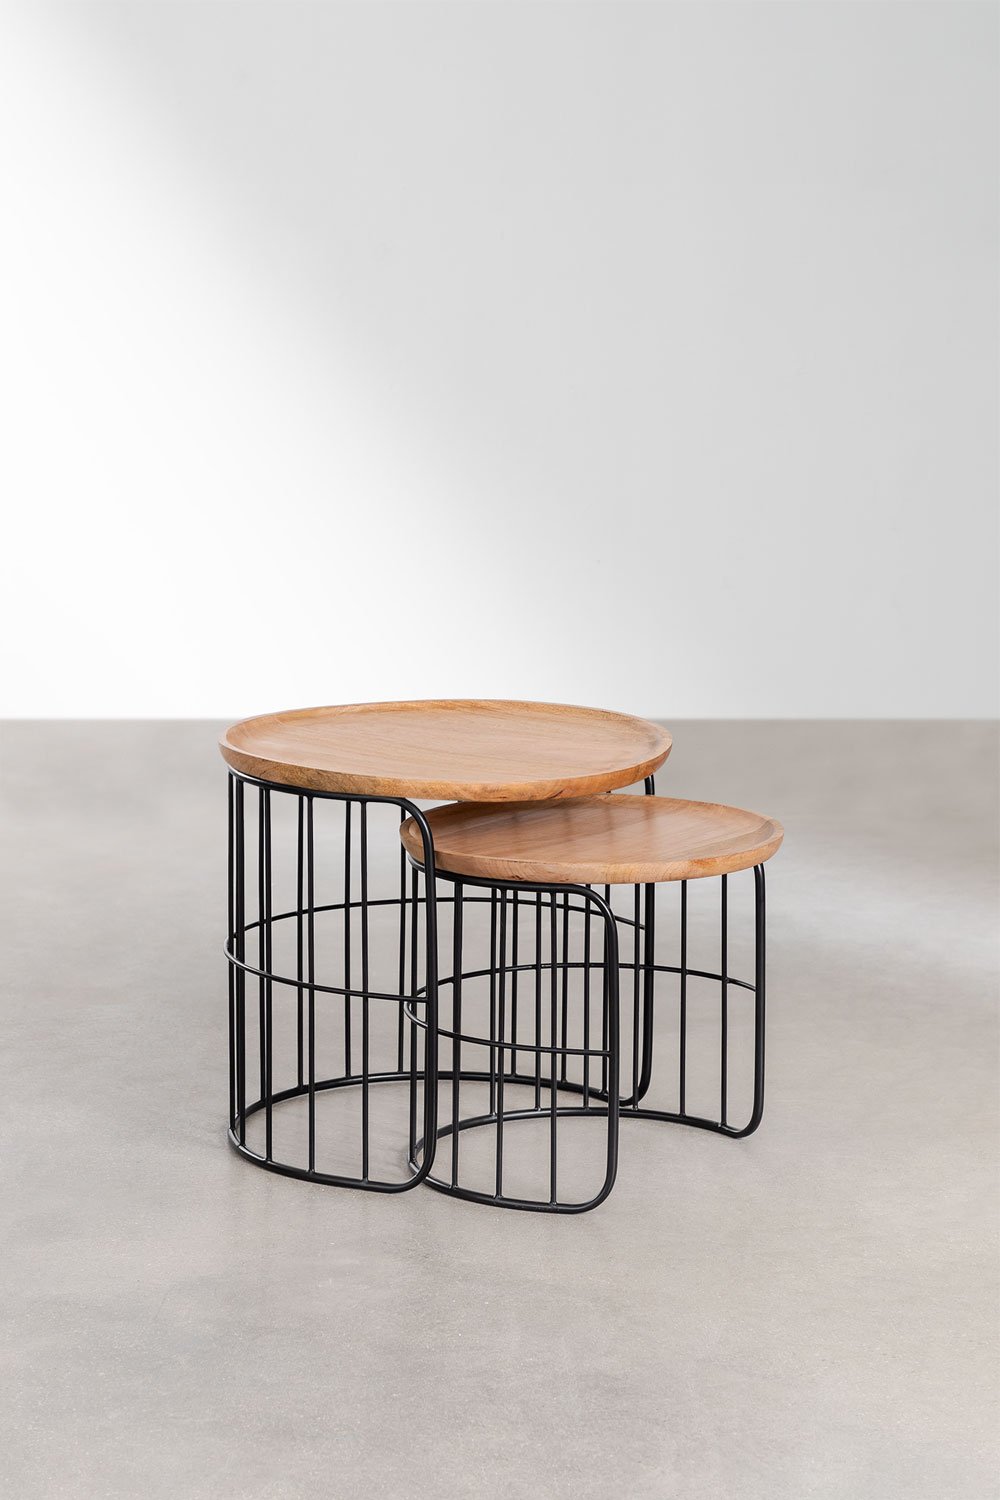 Nesting Tables in Recycled Wood Ound, gallery image 1